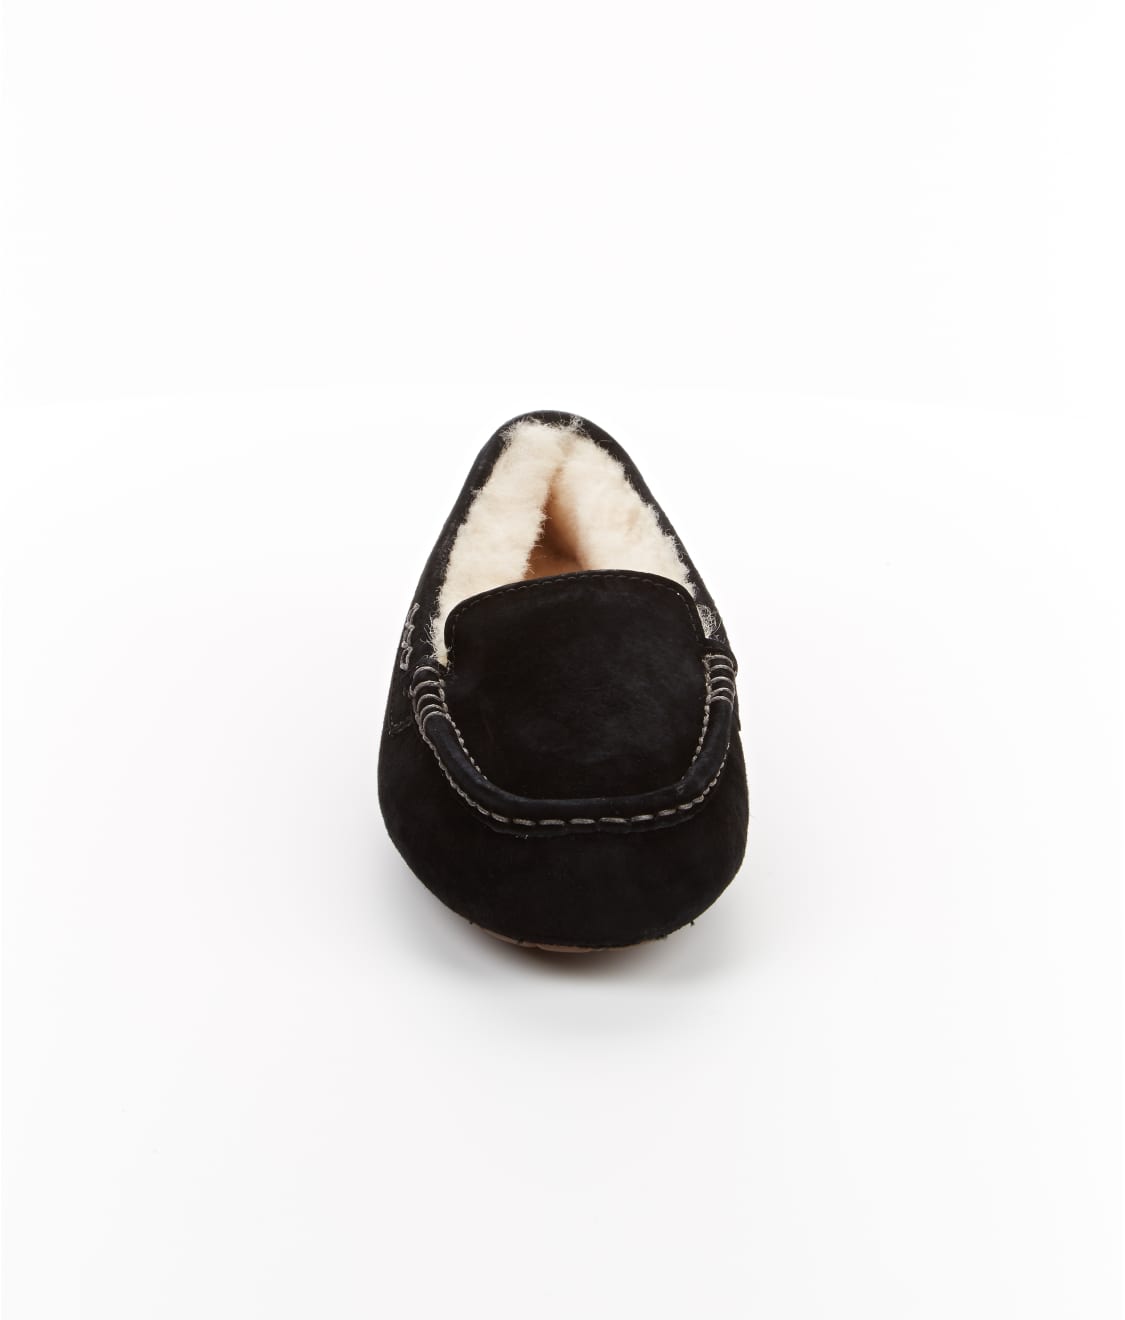 UGG Ansley Slippers & Reviews | Bare Necessities (Style 3312)